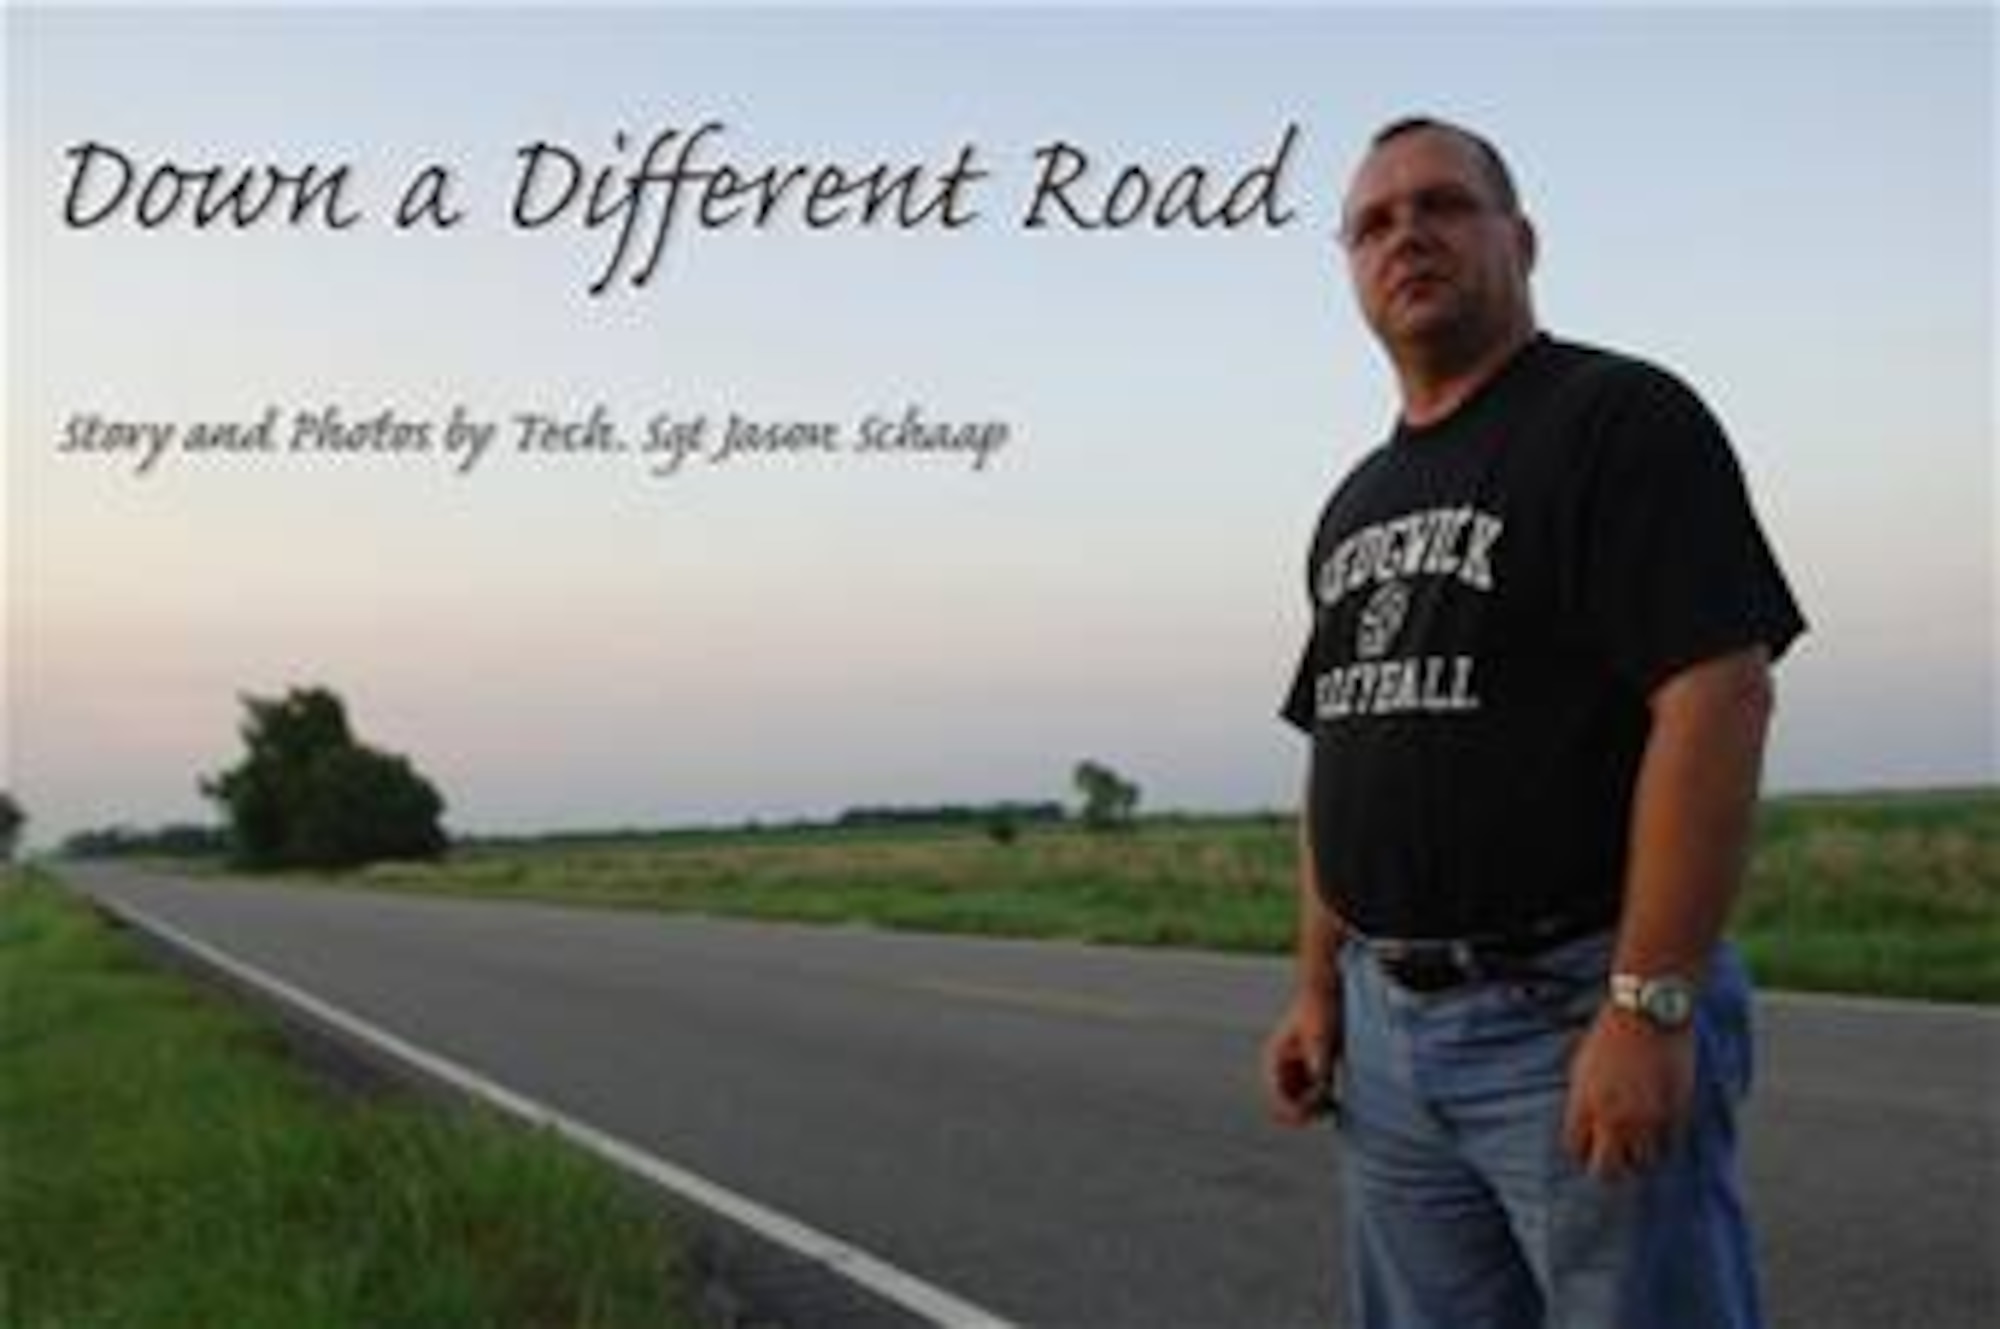 Shelby Gobel stands on a country road a few miles north of his home in Sedgwick, Kan.  His life was forever changed when he had a motorcycle accident at the same location one year prior. (Air Force Photo/Tech. Sgt. Jason Schaap)